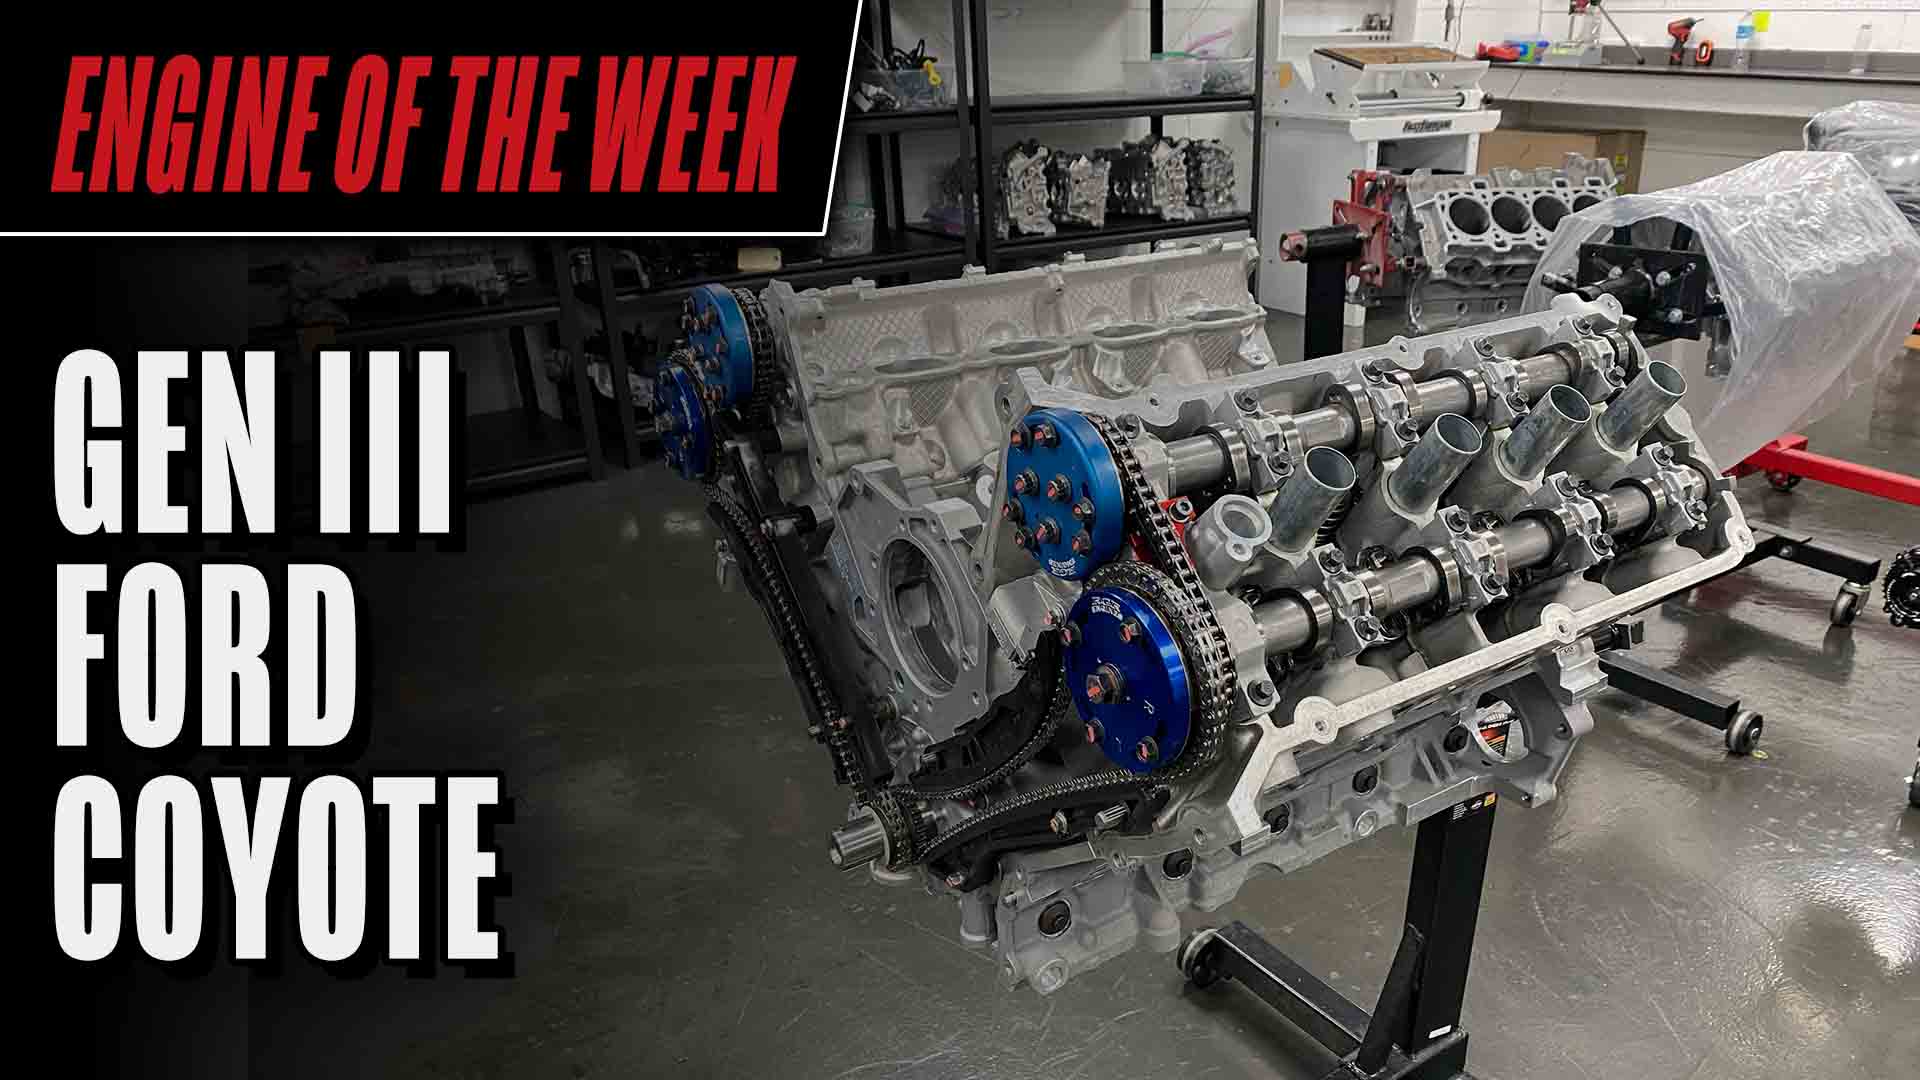 Ford Coyote engine